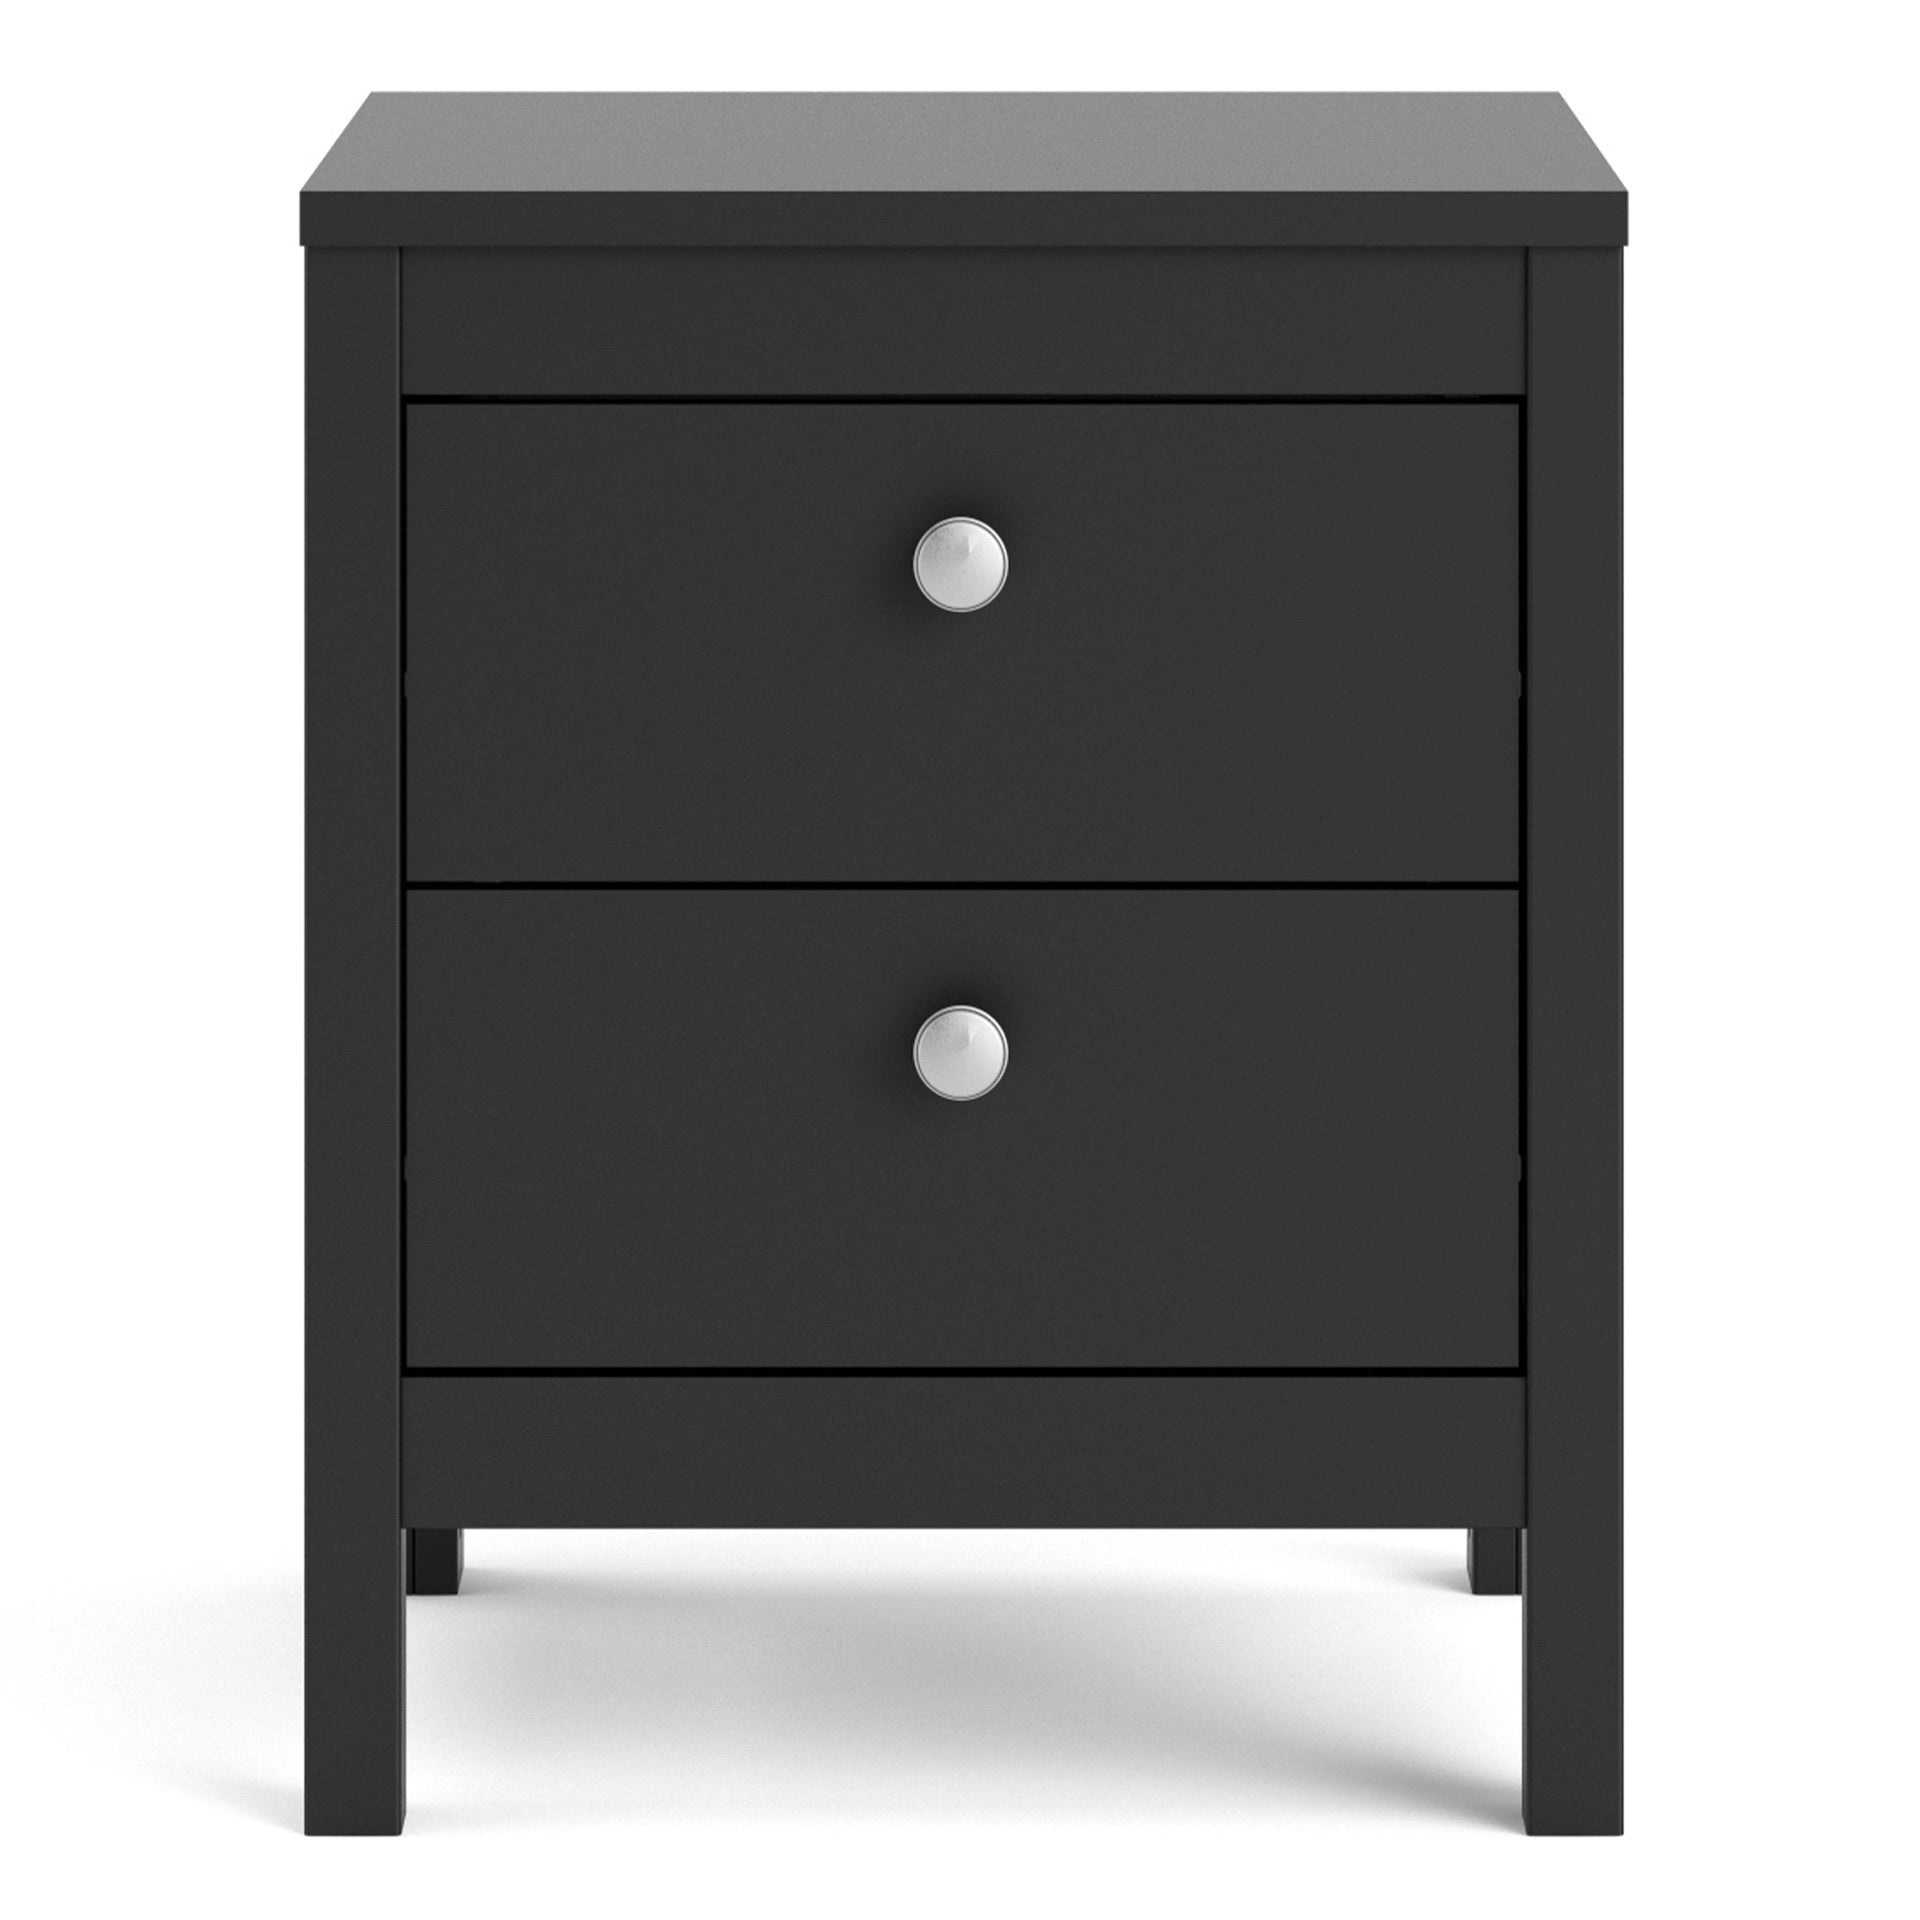 Furniture To Go Madrid Bedside Table 2 Drawers in Matt Black